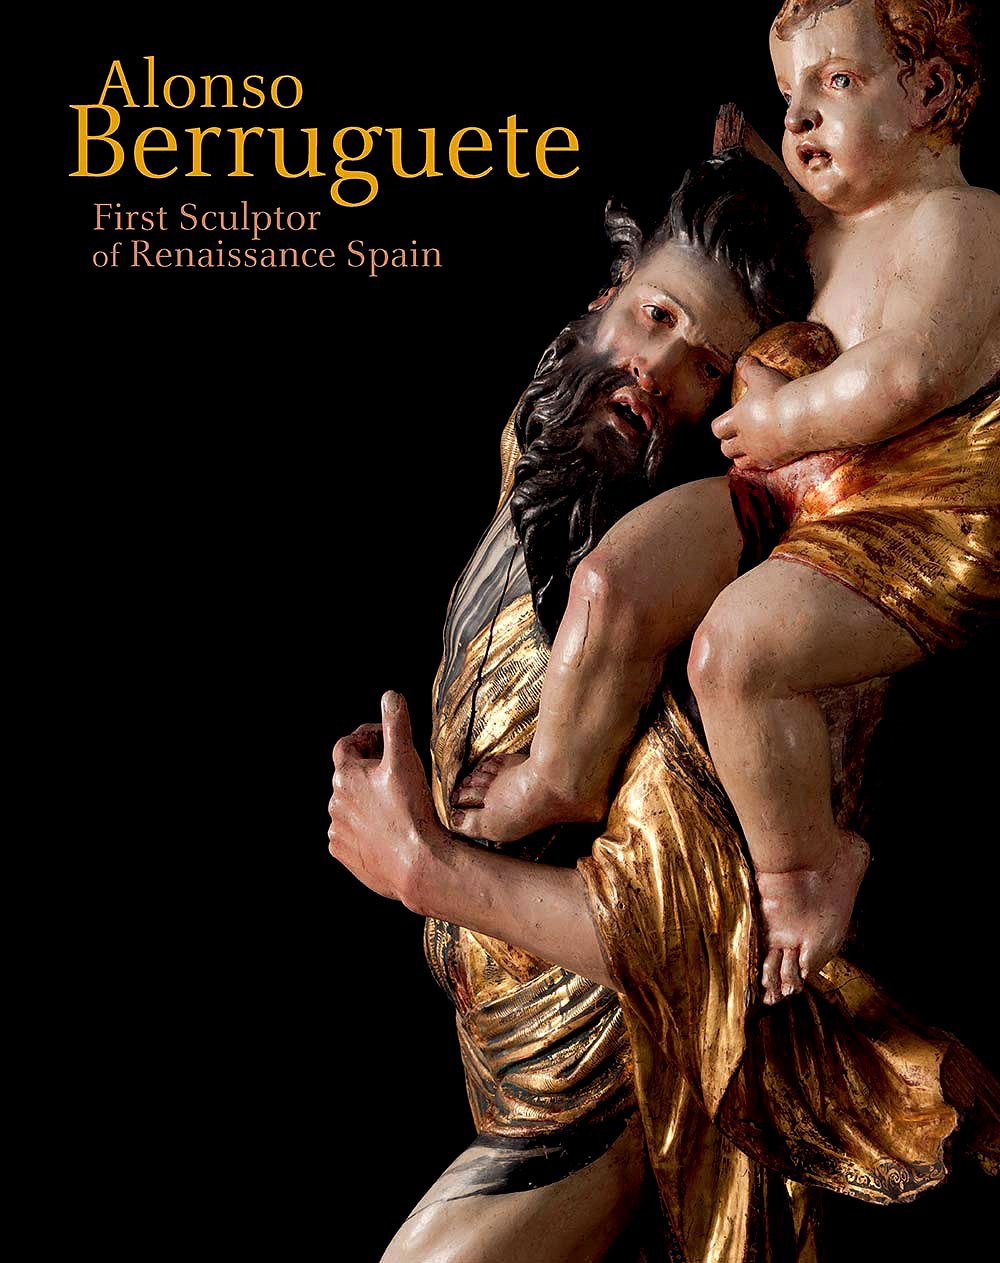 Alonso Berruguete: First Sculptor of Renaissance / C. D. Dickerson III and Mark McDonald, eds. Spain National Gallery of Art and the Meadows Museum in association with Yale University Press and Centro de Estudios Europa Hispánica. 272 с. £50, $55. На английском языке